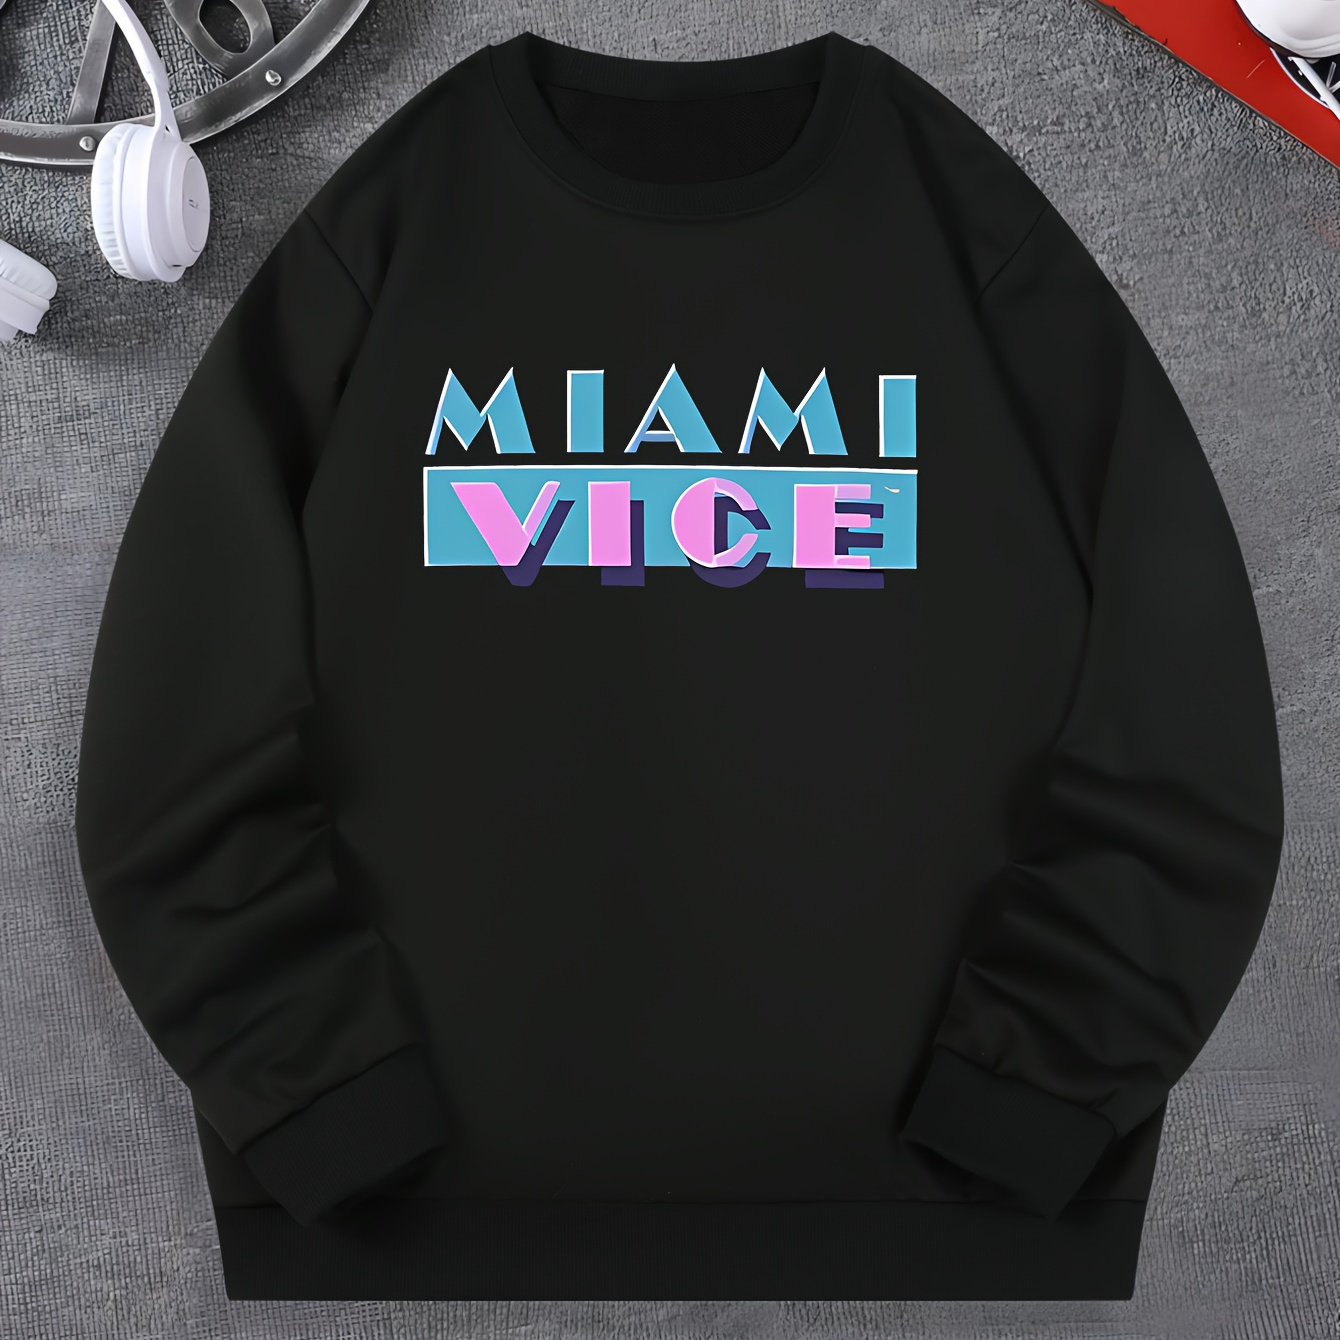 

Mimi Vice Print Fashionable Men's Casual Long Sleeve Crew Neck Pullover Sweatshirt, Suitable For Outdoor Sports, For Autumn Spring, Can Be Paired With Hip-hop Necklace, As Gifts